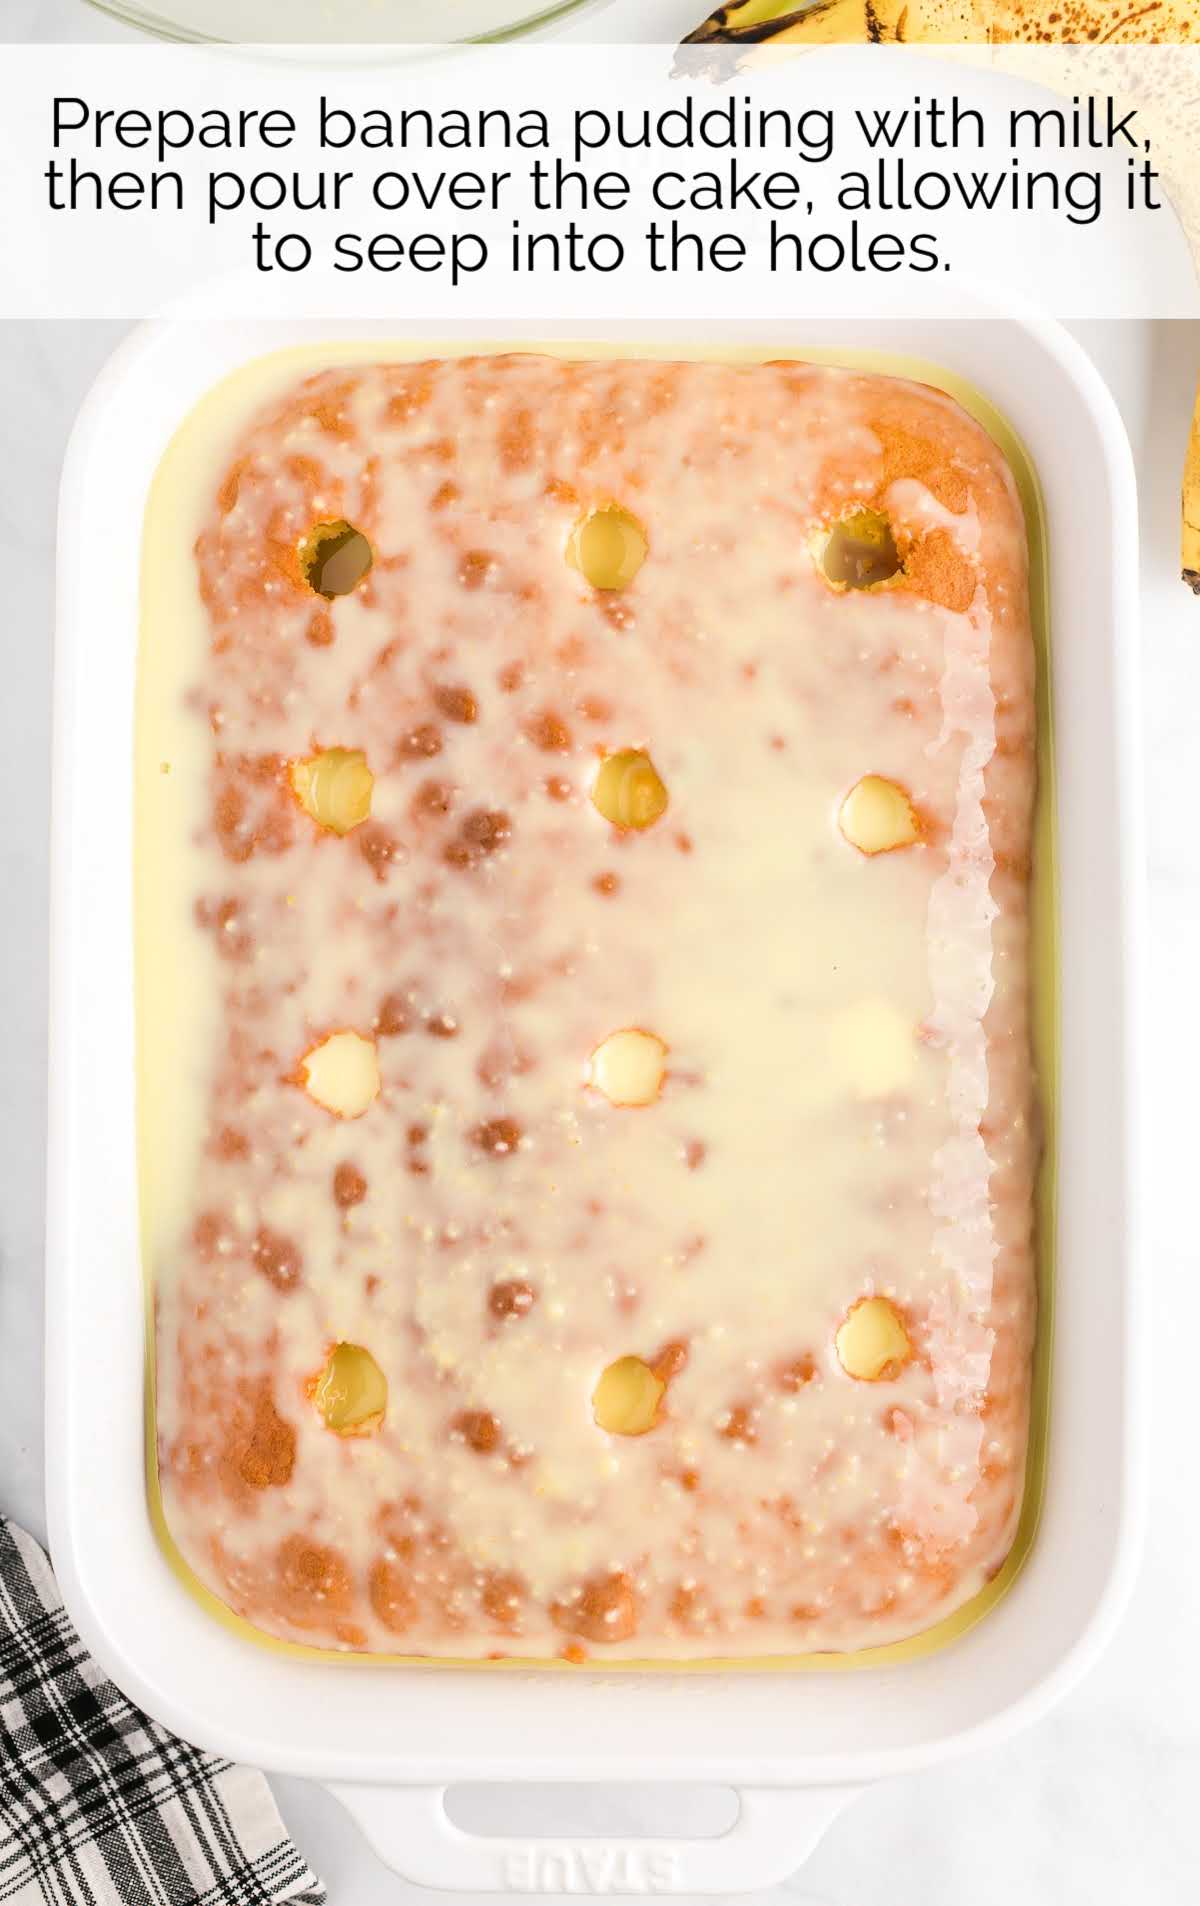 banana pudding with milk poured over the cake in a baking dish